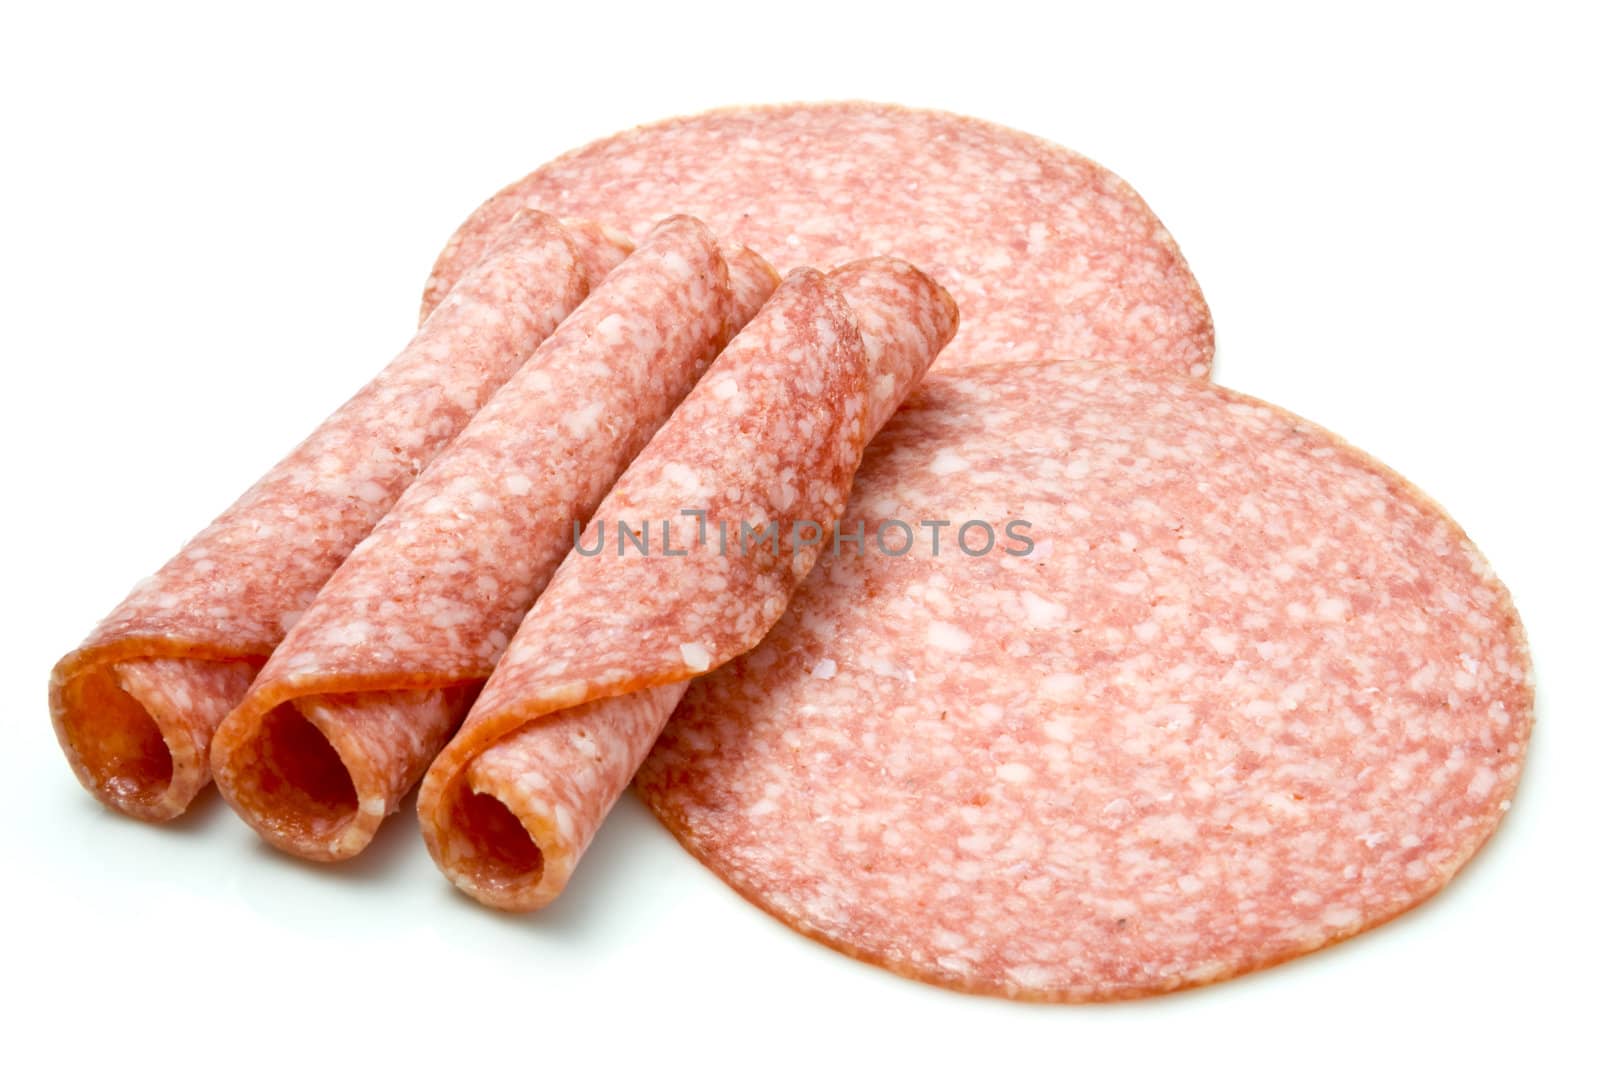 Slices of salami isolated over white background